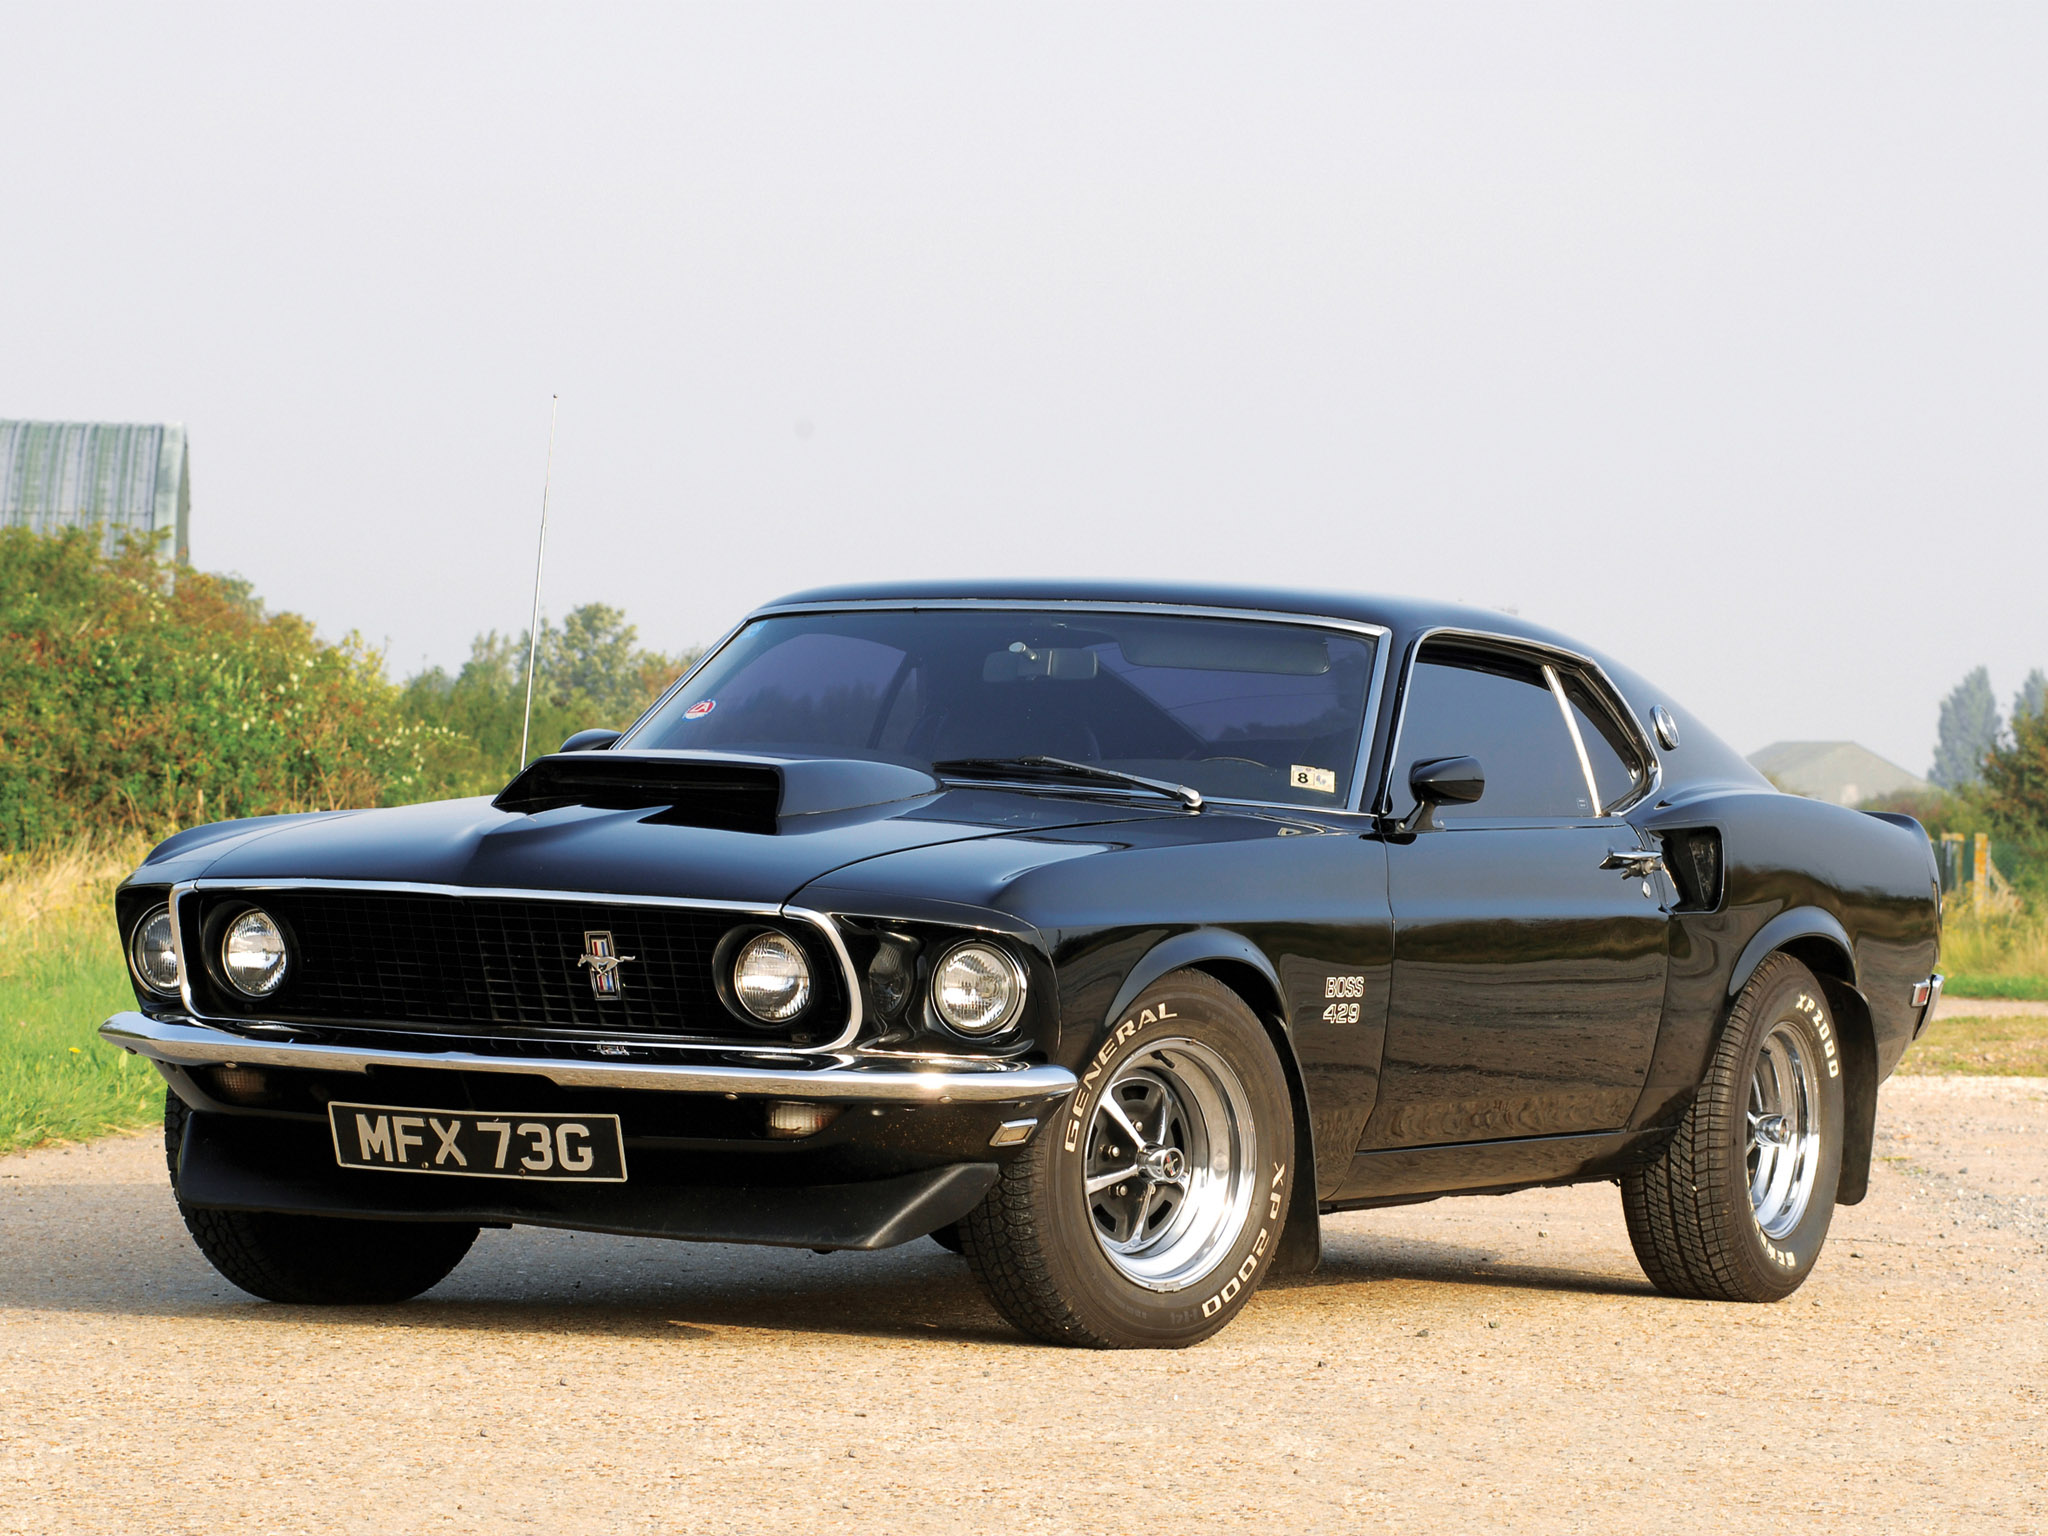 Ford Mustang Boss 429 Wallpapers Vehicles Hq Ford Mustang Boss 429 Pictures 4k Wallpapers 2019